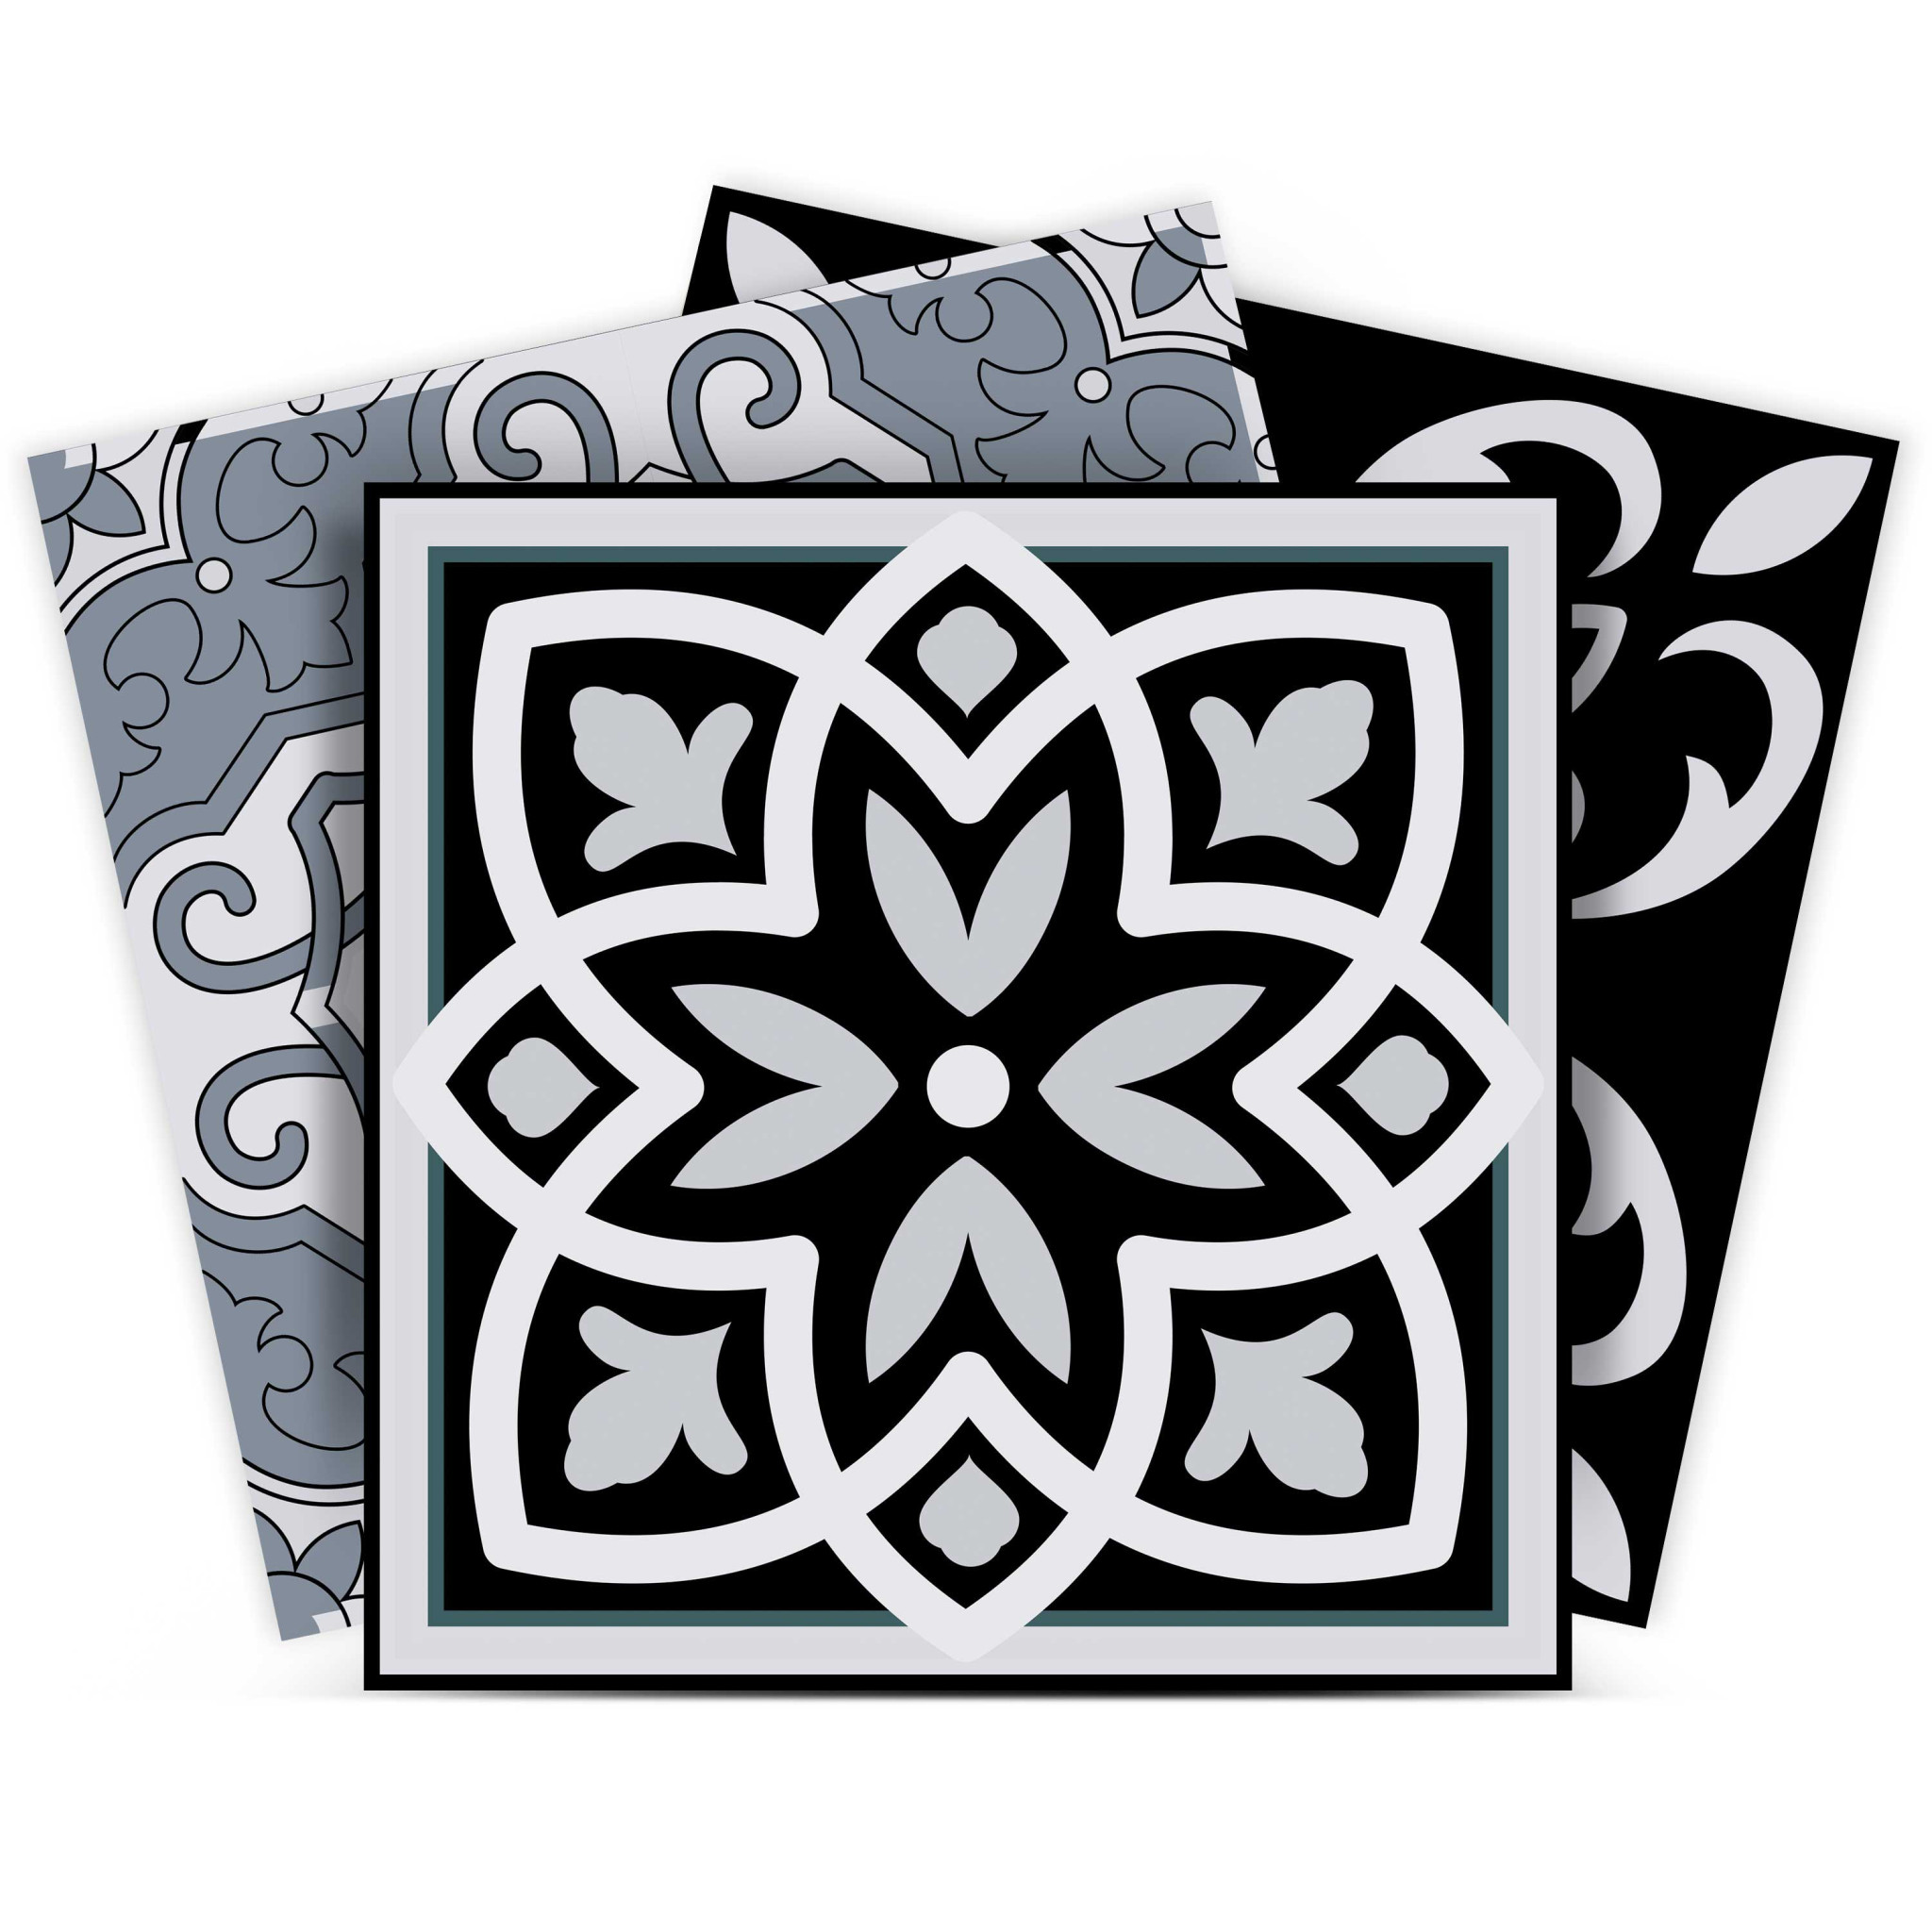 6" X 6" Black White and Gray Mosaic Peel and Stick Tiles-399872-1